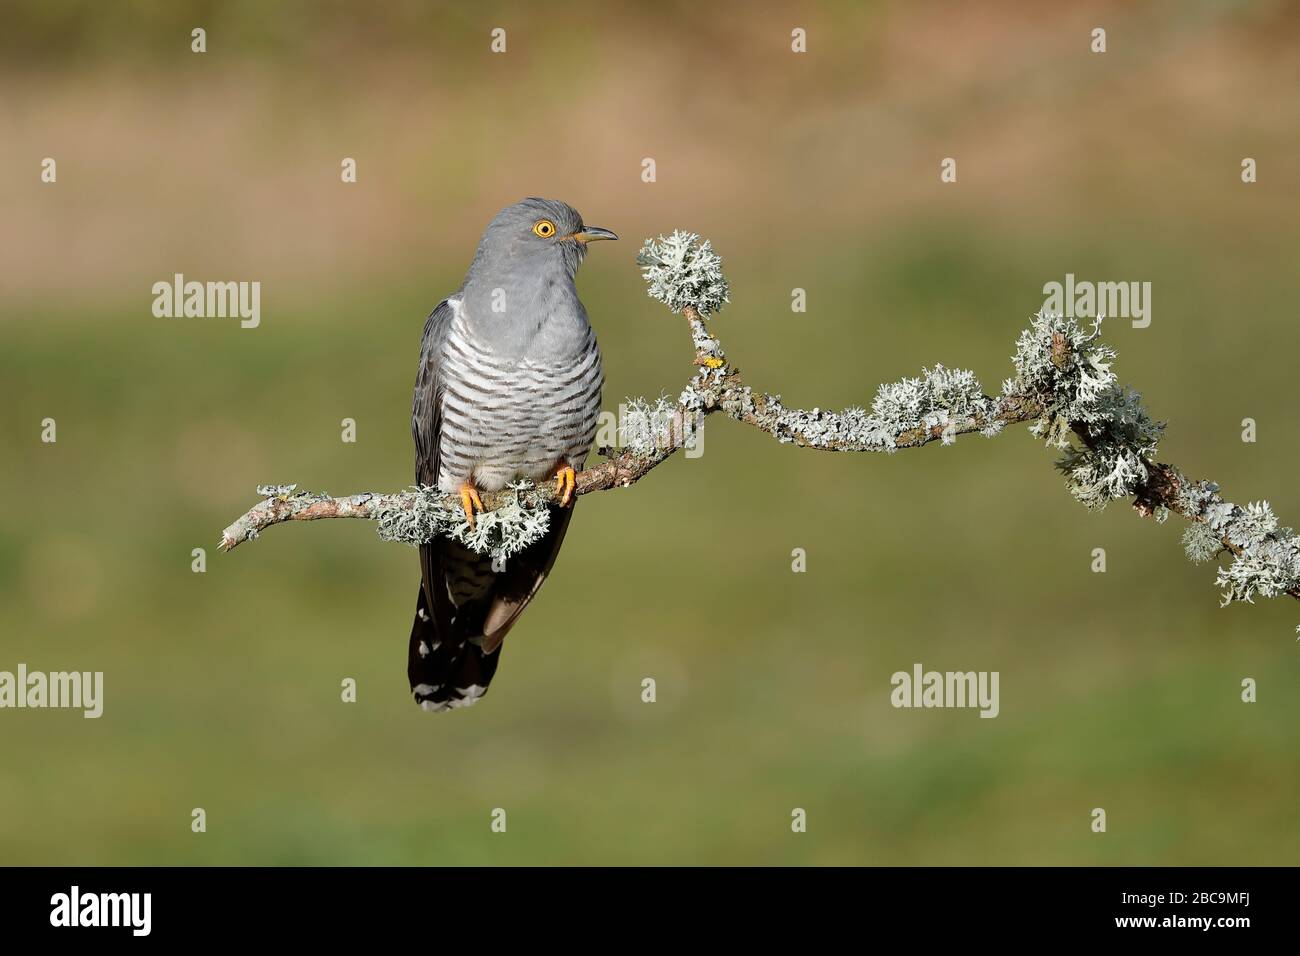 The common cuckoo is a member of the cuckoo order of birds, Cuculiformes, which includes the roadrunners, the anis and the coucals. Stock Photo